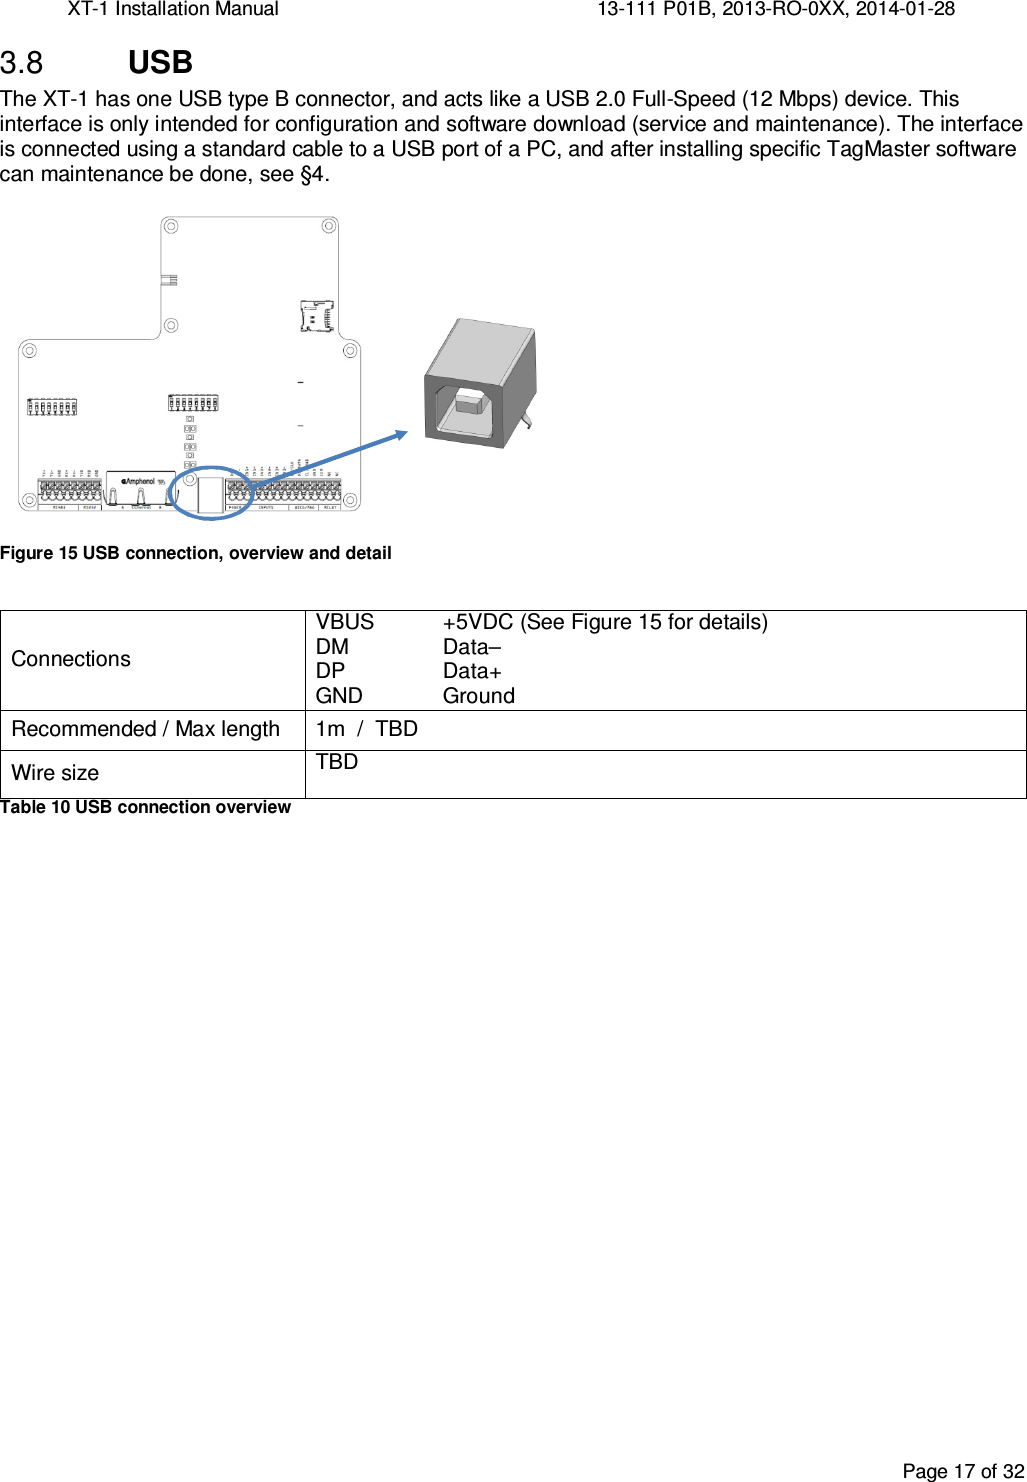 XT-1 Installation Manual     13-111 P01B, 2013-RO-0XX, 2014-01-28  Page 17 of 32   USB 3.8The XT-1 has one USB type B connector, and acts like a USB 2.0 Full-Speed (12 Mbps) device. This interface is only intended for configuration and software download (service and maintenance). The interface is connected using a standard cable to a USB port of a PC, and after installing specific TagMaster software can maintenance be done, see §4.   Figure 15 USB connection, overview and detail  Connections VBUS +5VDC (See Figure 15 for details) DM  Data–  DP  Data+  GND  Ground Recommended / Max length  1m  /  TBD Wire size TBD Table 10 USB connection overview    